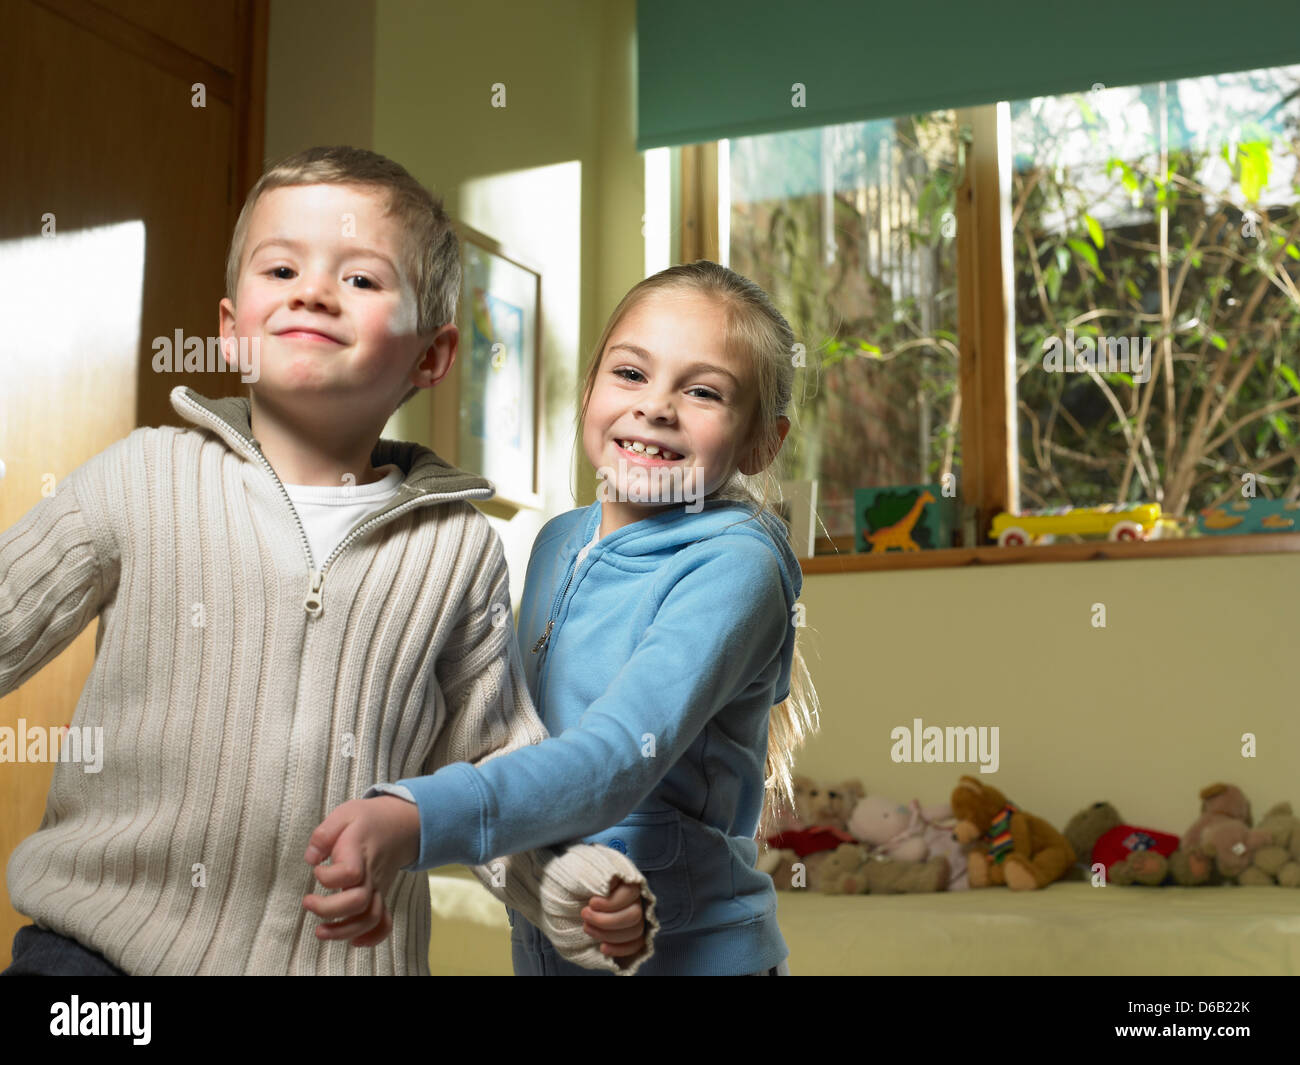 Children playing together indoors Stock Photo